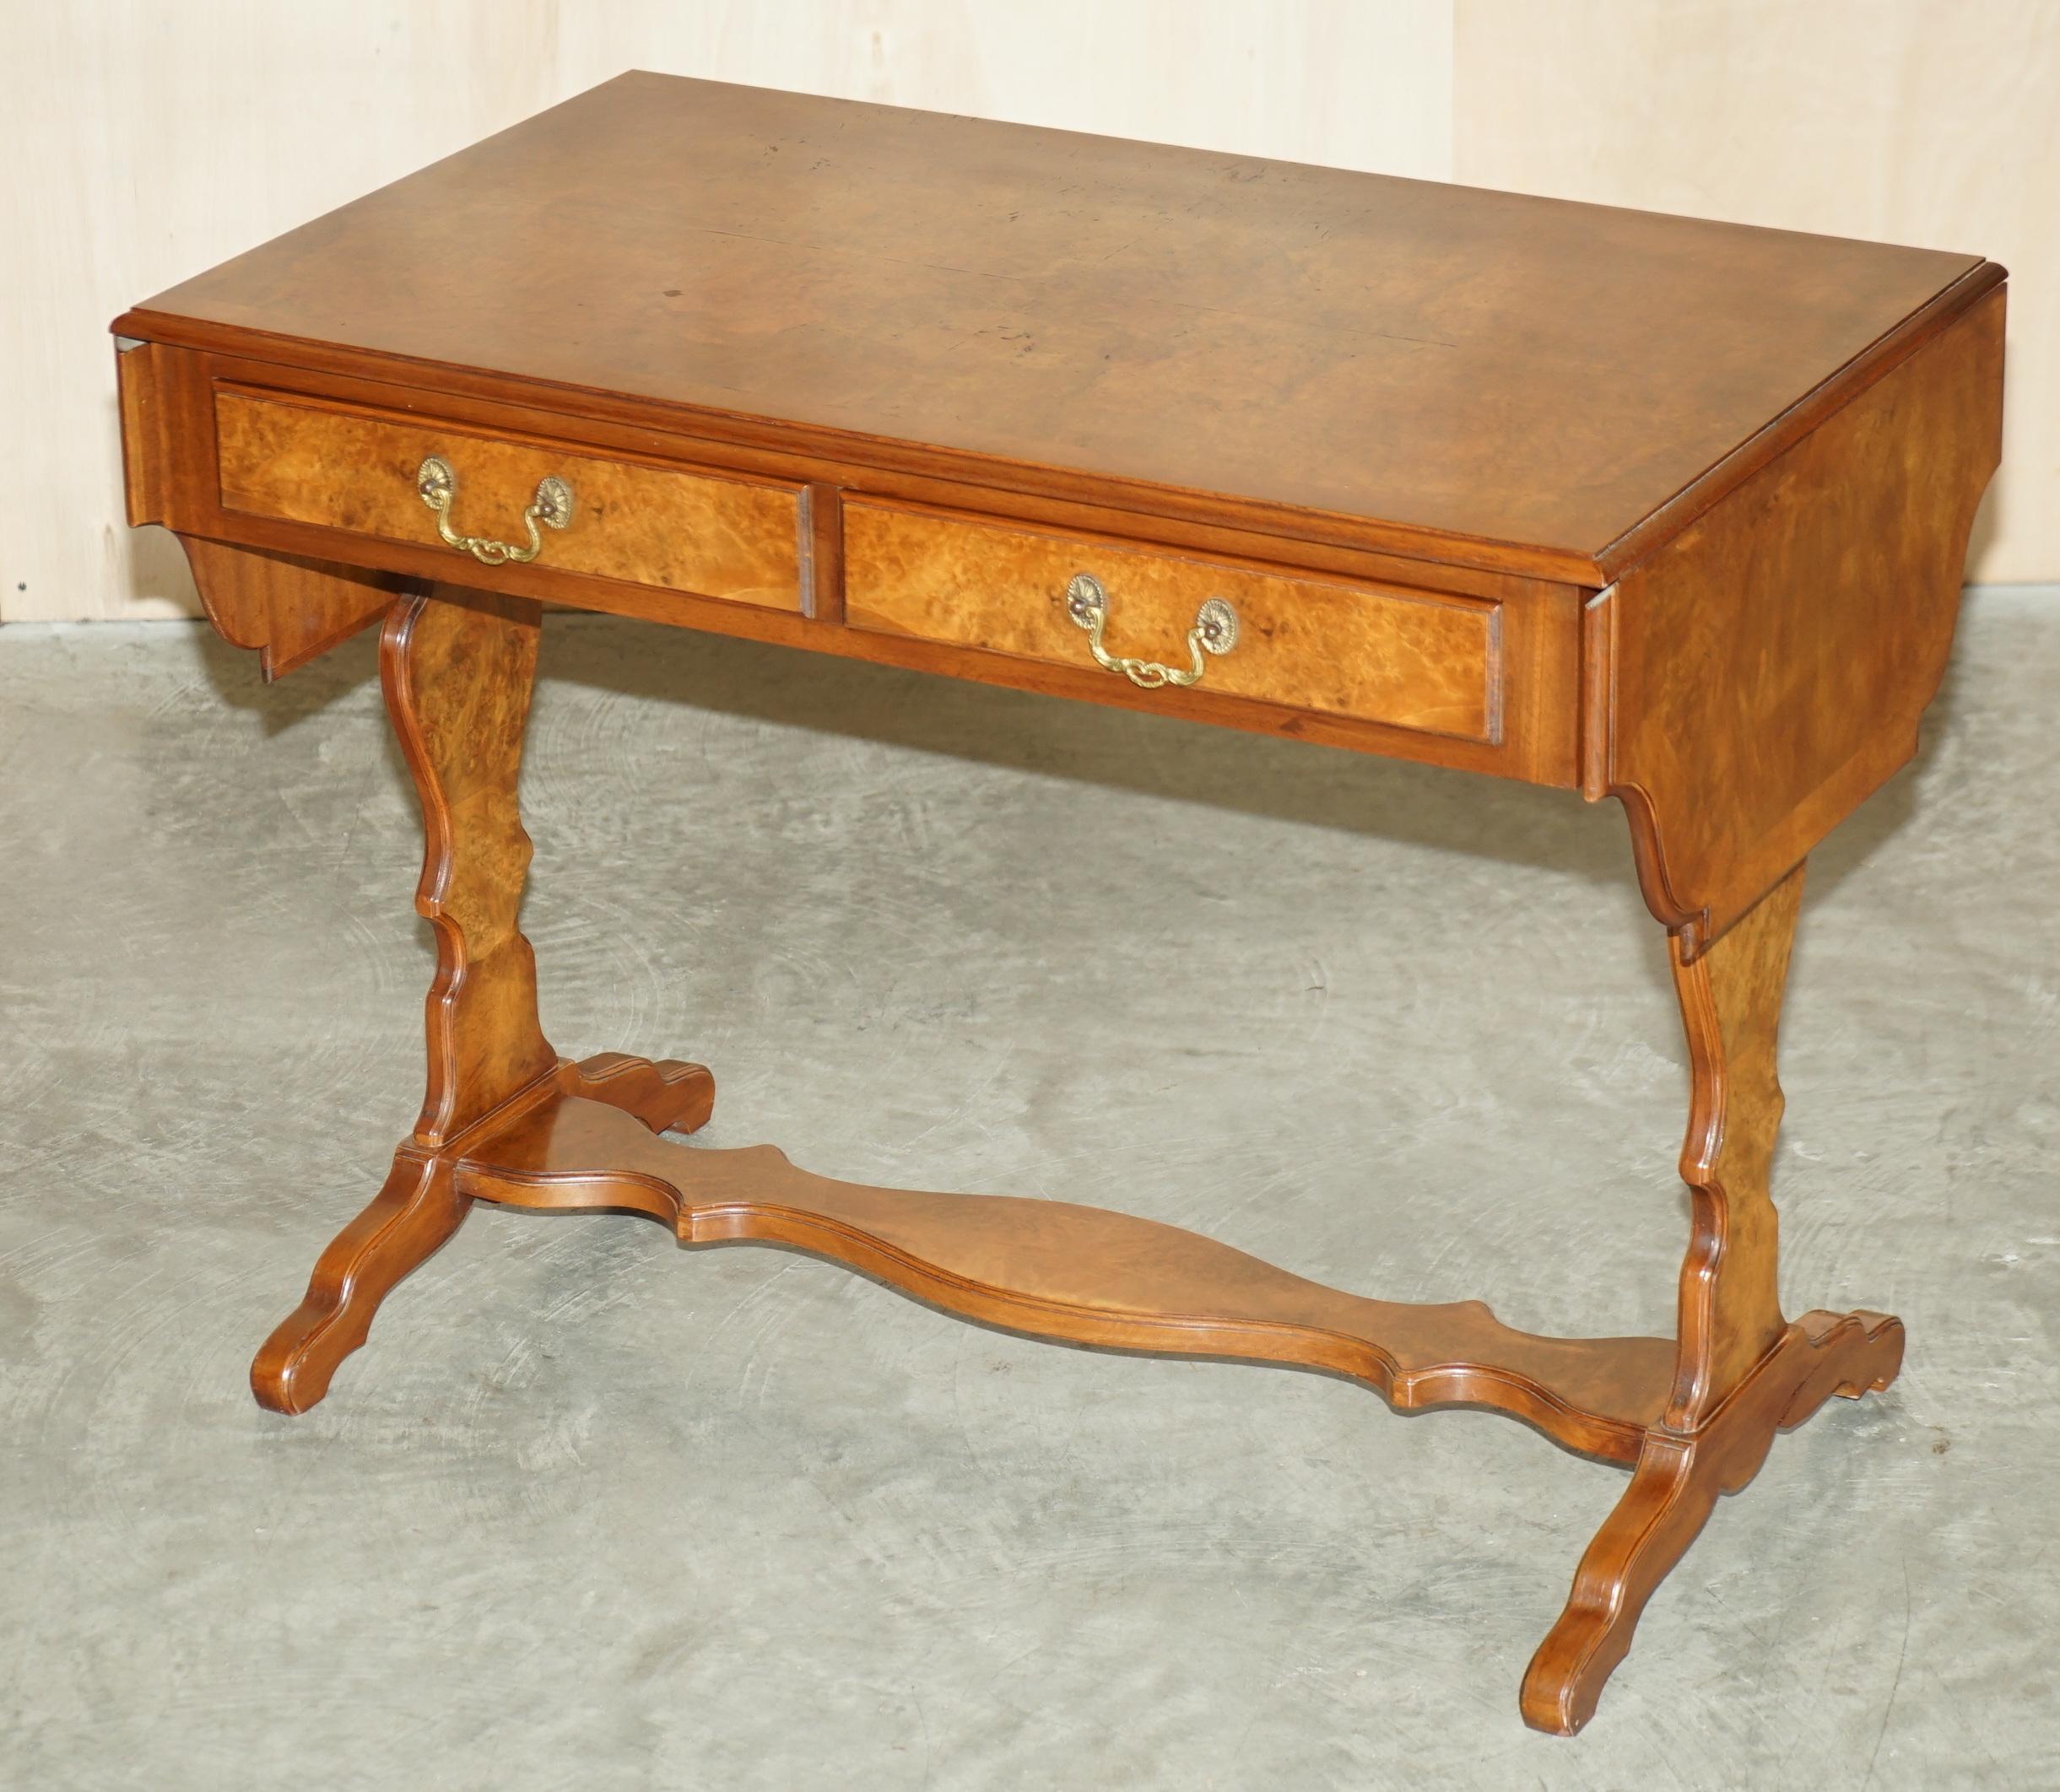 We are delighted to offer for sale this lovely vintage Bevan Funnell, Burr Walnut, extending sofa / occasional table.

A very well made and decorative piece, this table is of a Regency design, and was called a sofa table, it would literally sit